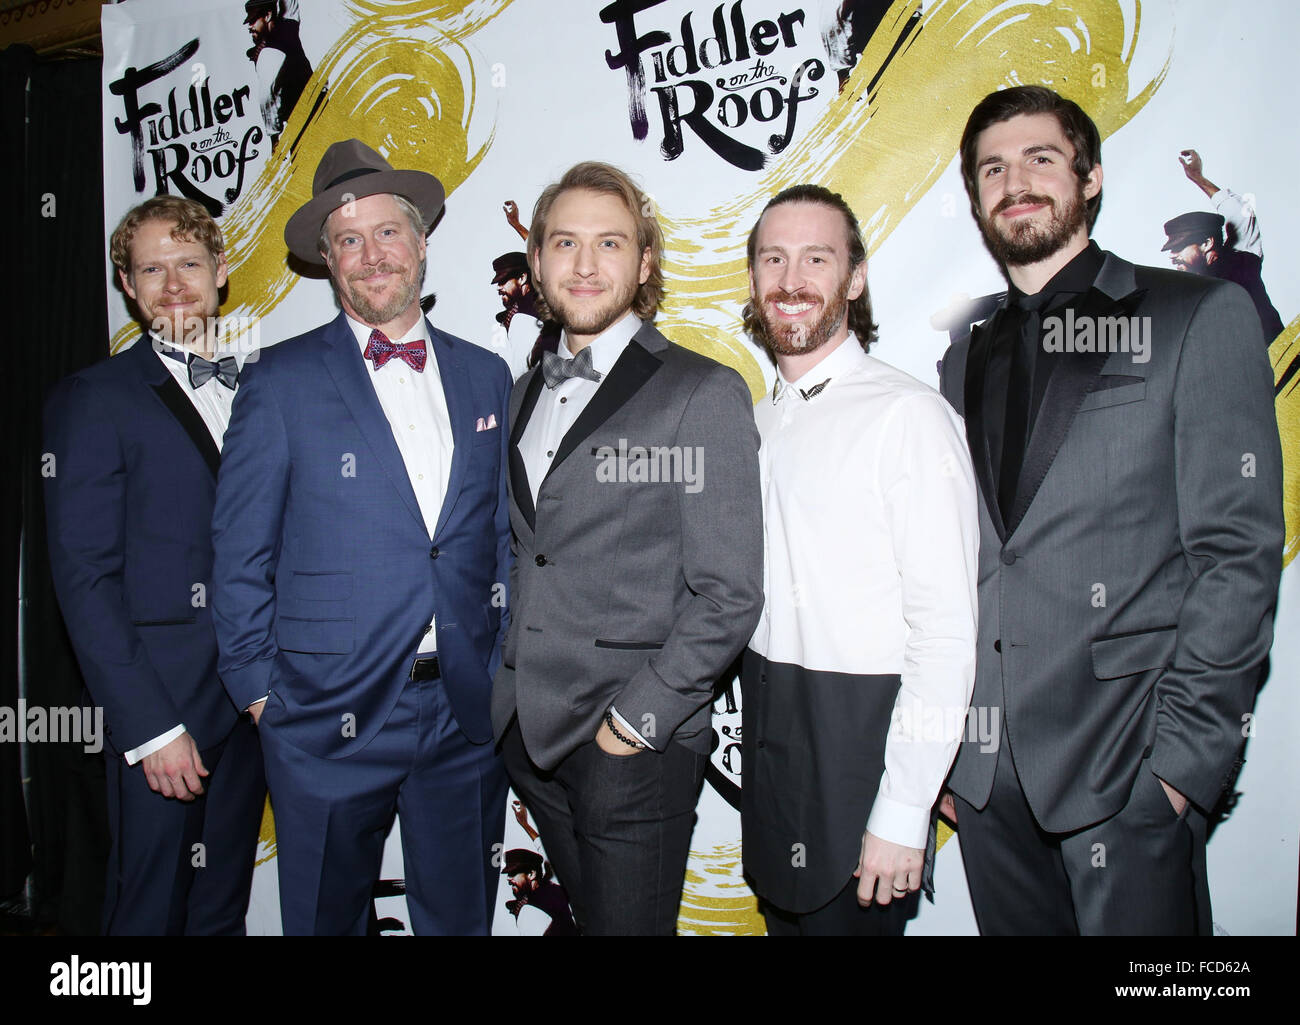 Opening night party for Fiddler On the Roof held at Gotham Hall - Arrivals.  Featuring: Aaron Young, Karl Kenzler, Nick Rehberger, Stephen Carrasco, Eric Chambliss Where: New York City, New York, United States When: 21 Dec 2015 Stock Photo